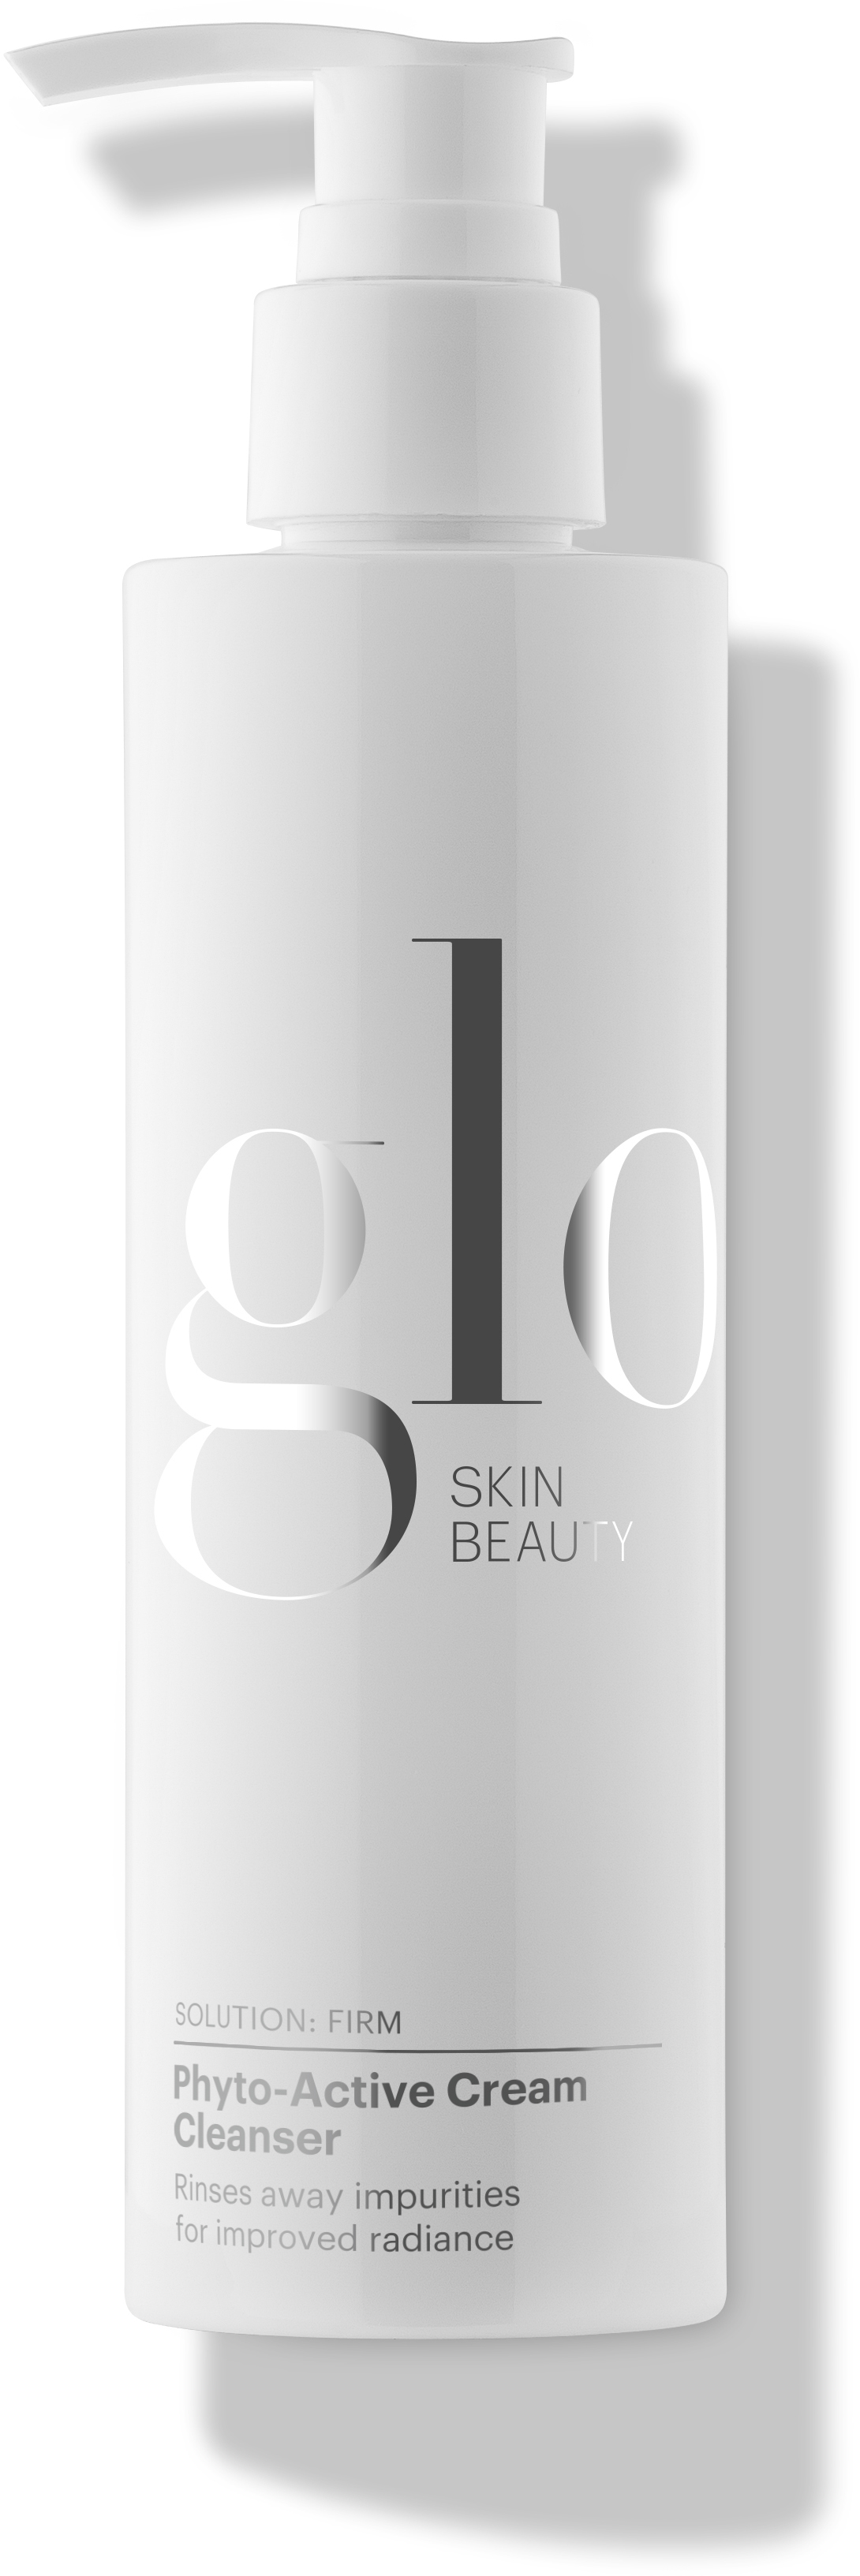 gloTherapeutics Cyto-luxe Cleanser